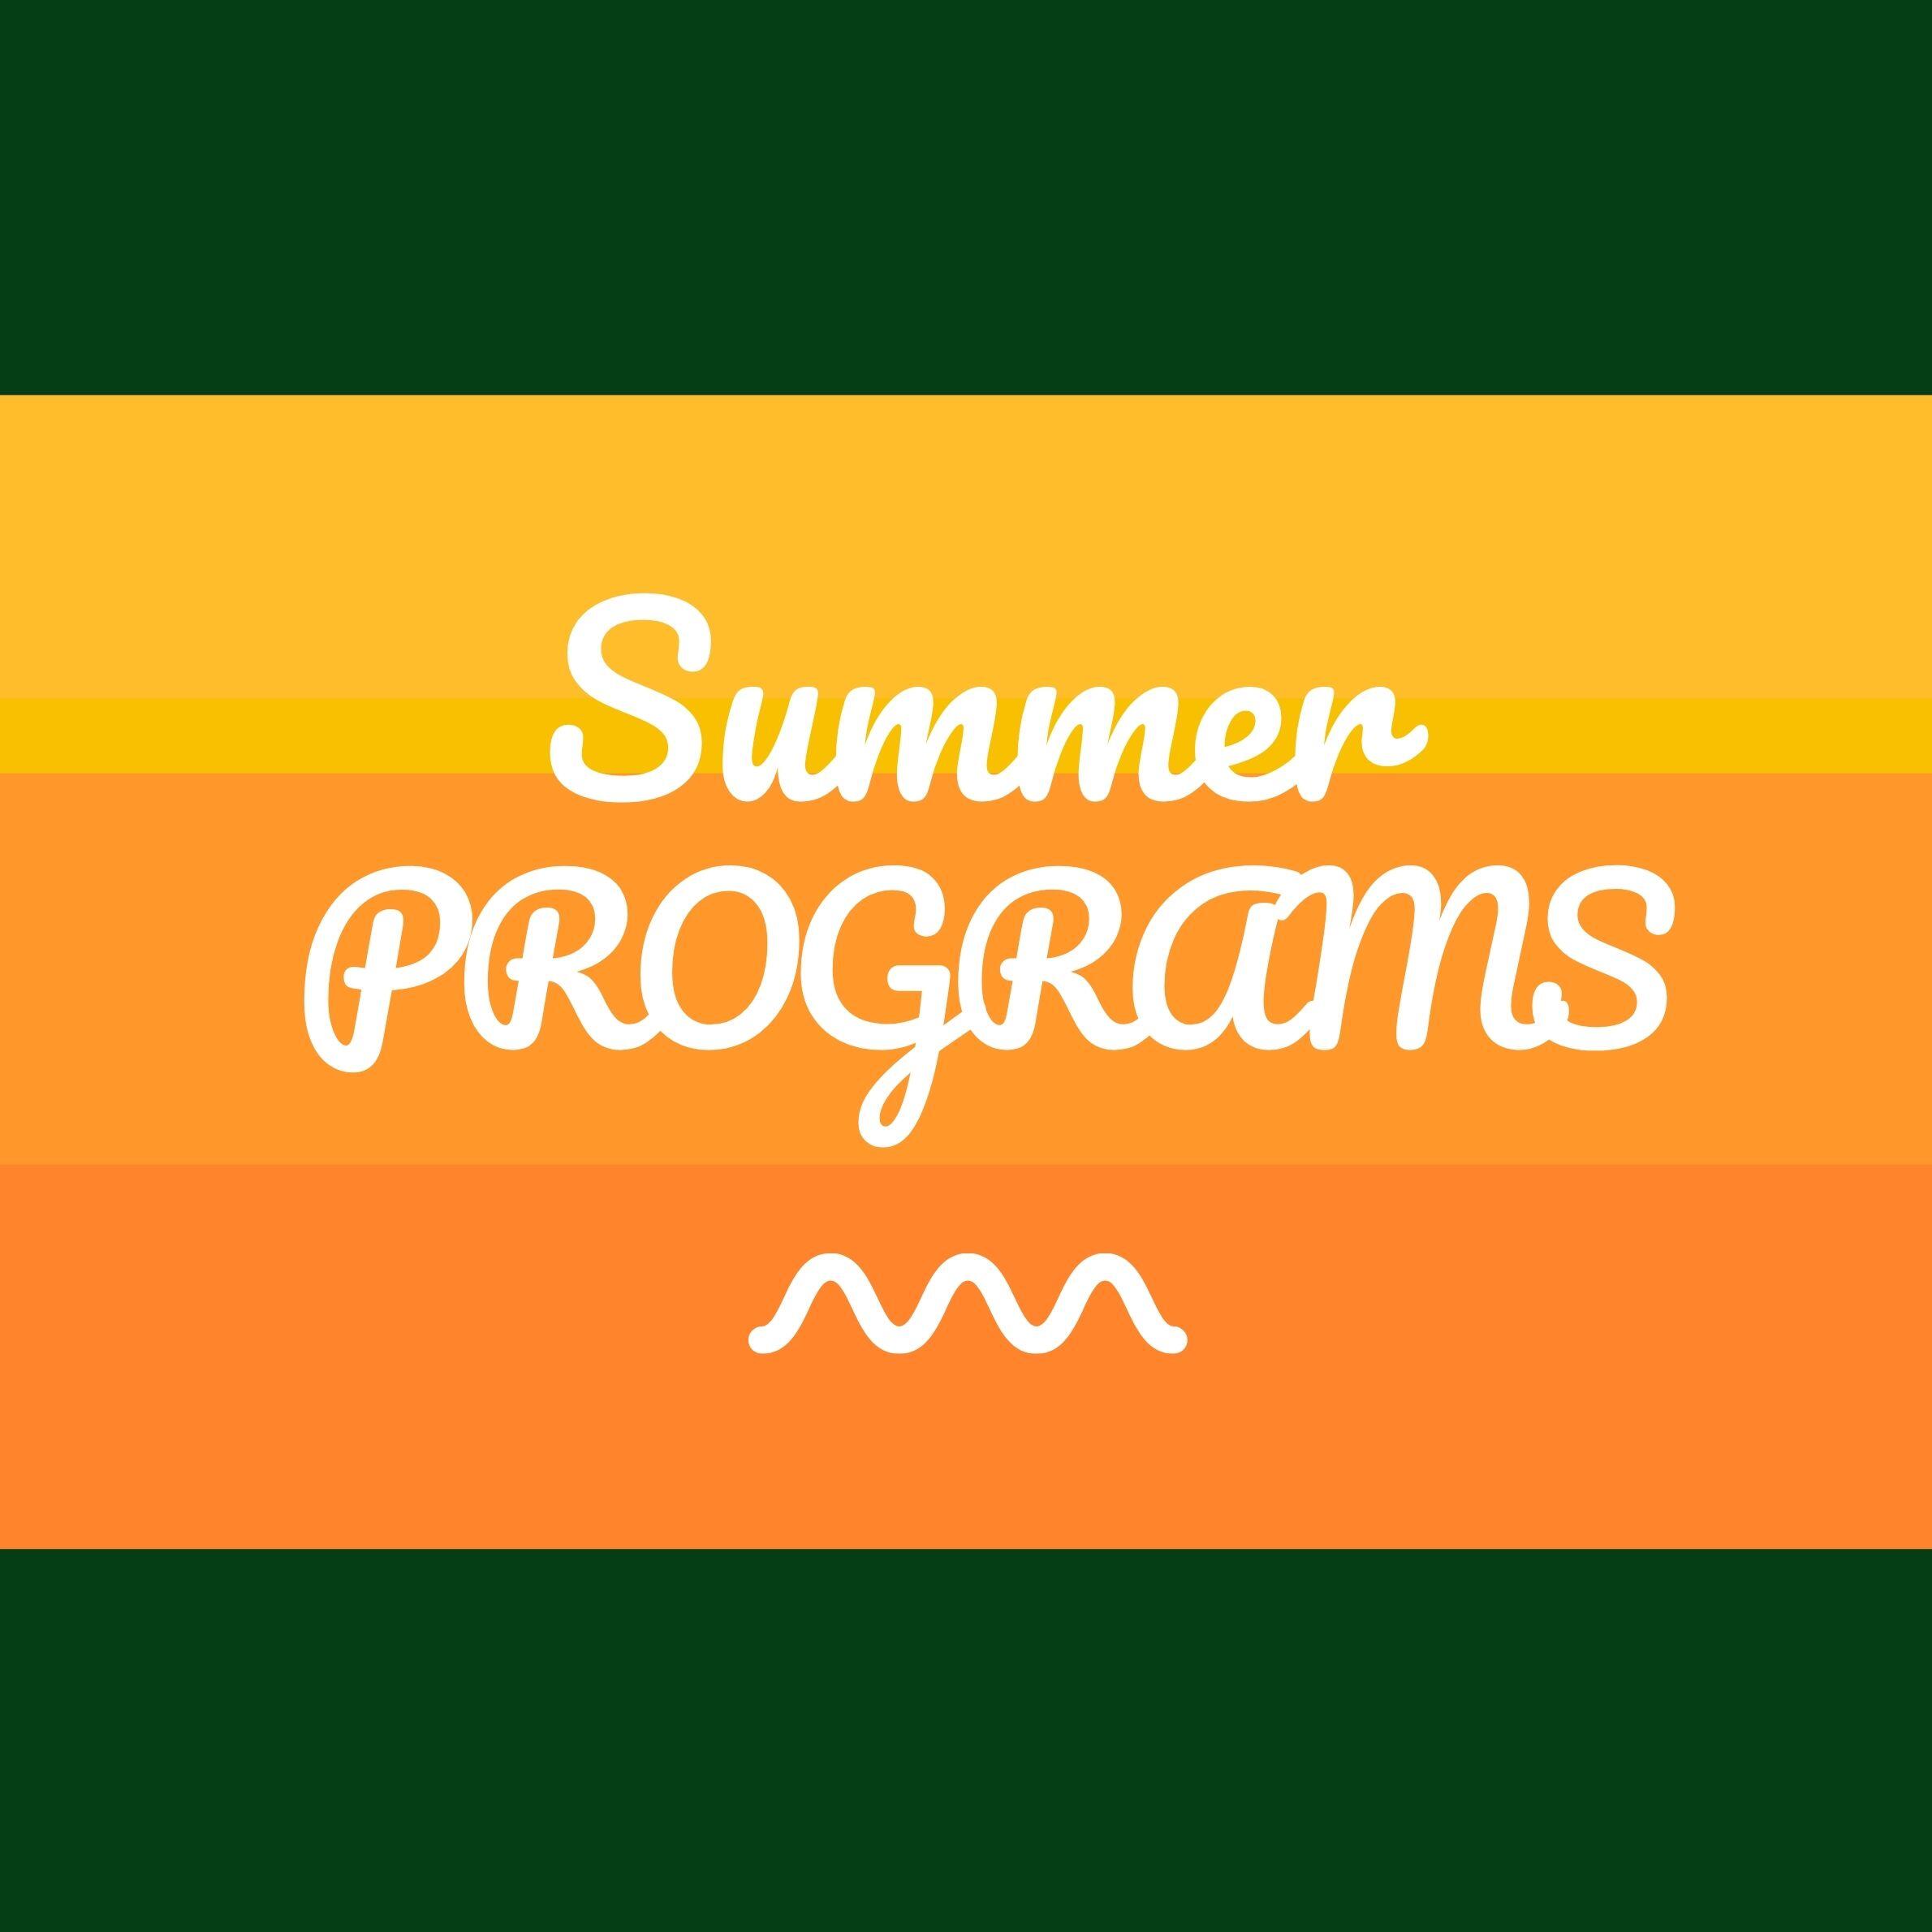 Colorful graphic depicting "Summer Programs" document